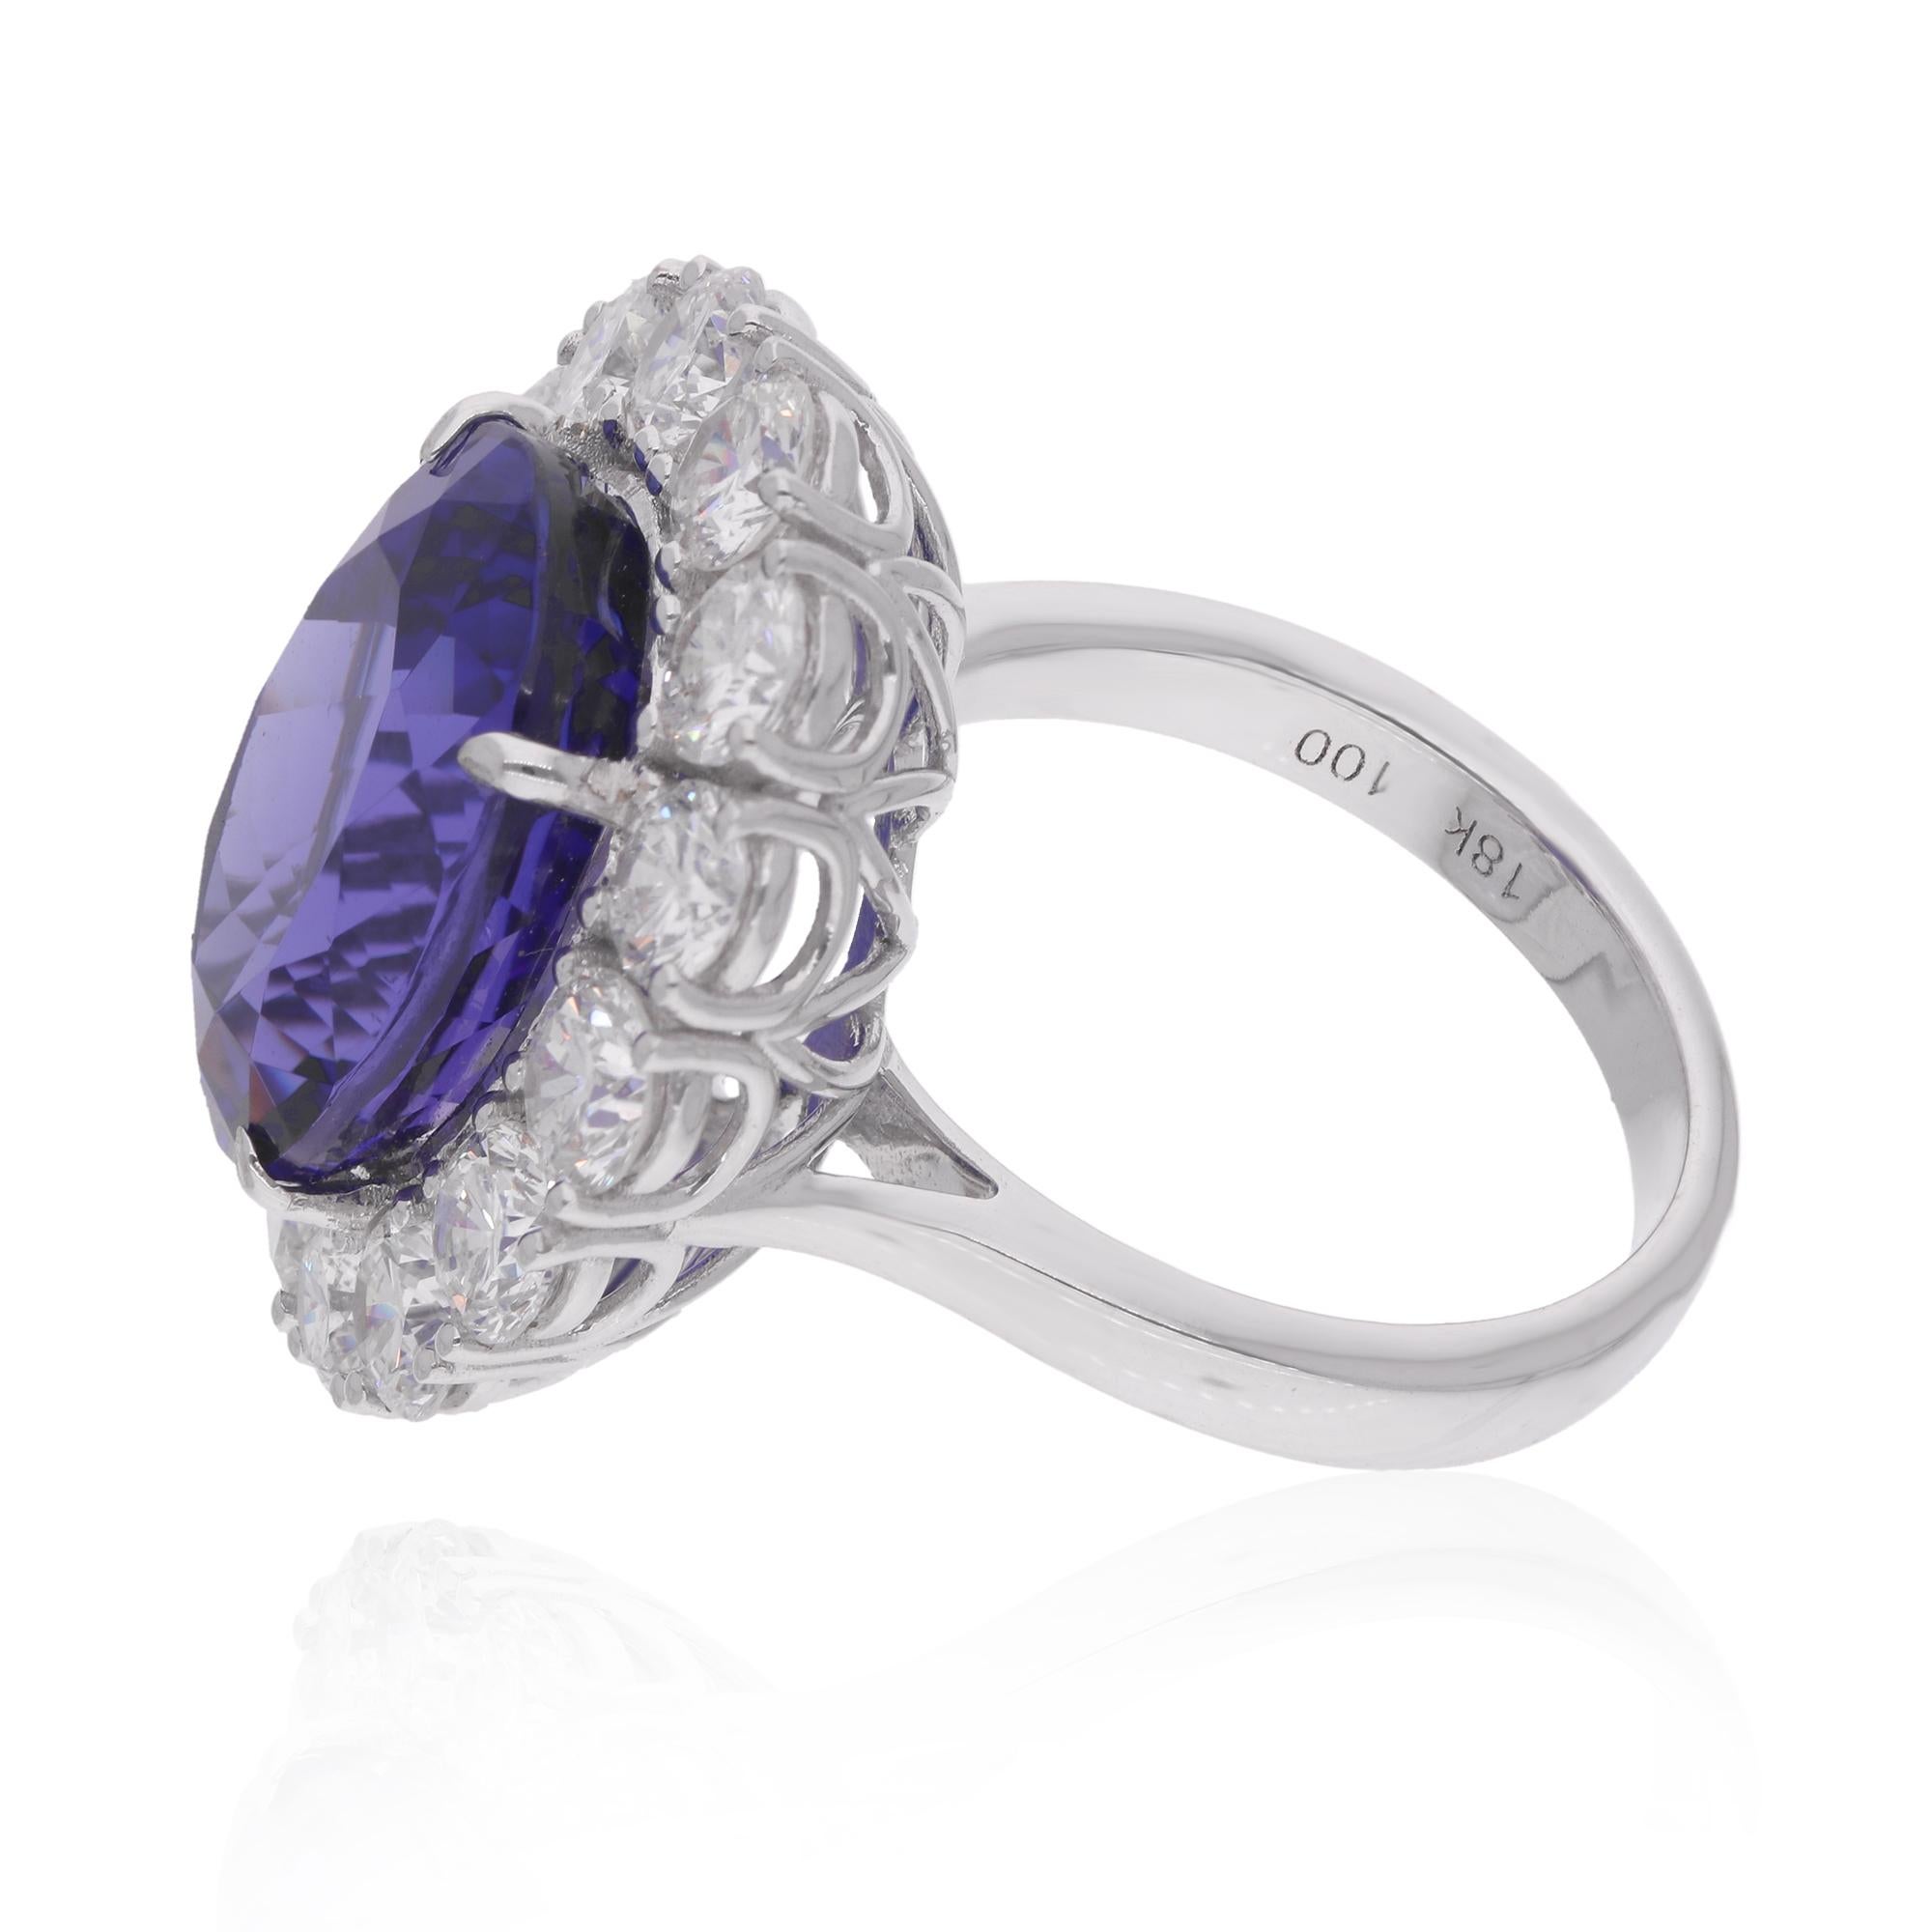 Crafted with meticulous attention to detail, the ring is fashioned in lavish 18 Karat White Gold, adding a regal touch to the design. The white gold setting provides the perfect backdrop for the Tanzanite and Diamonds, creating a harmonious blend of